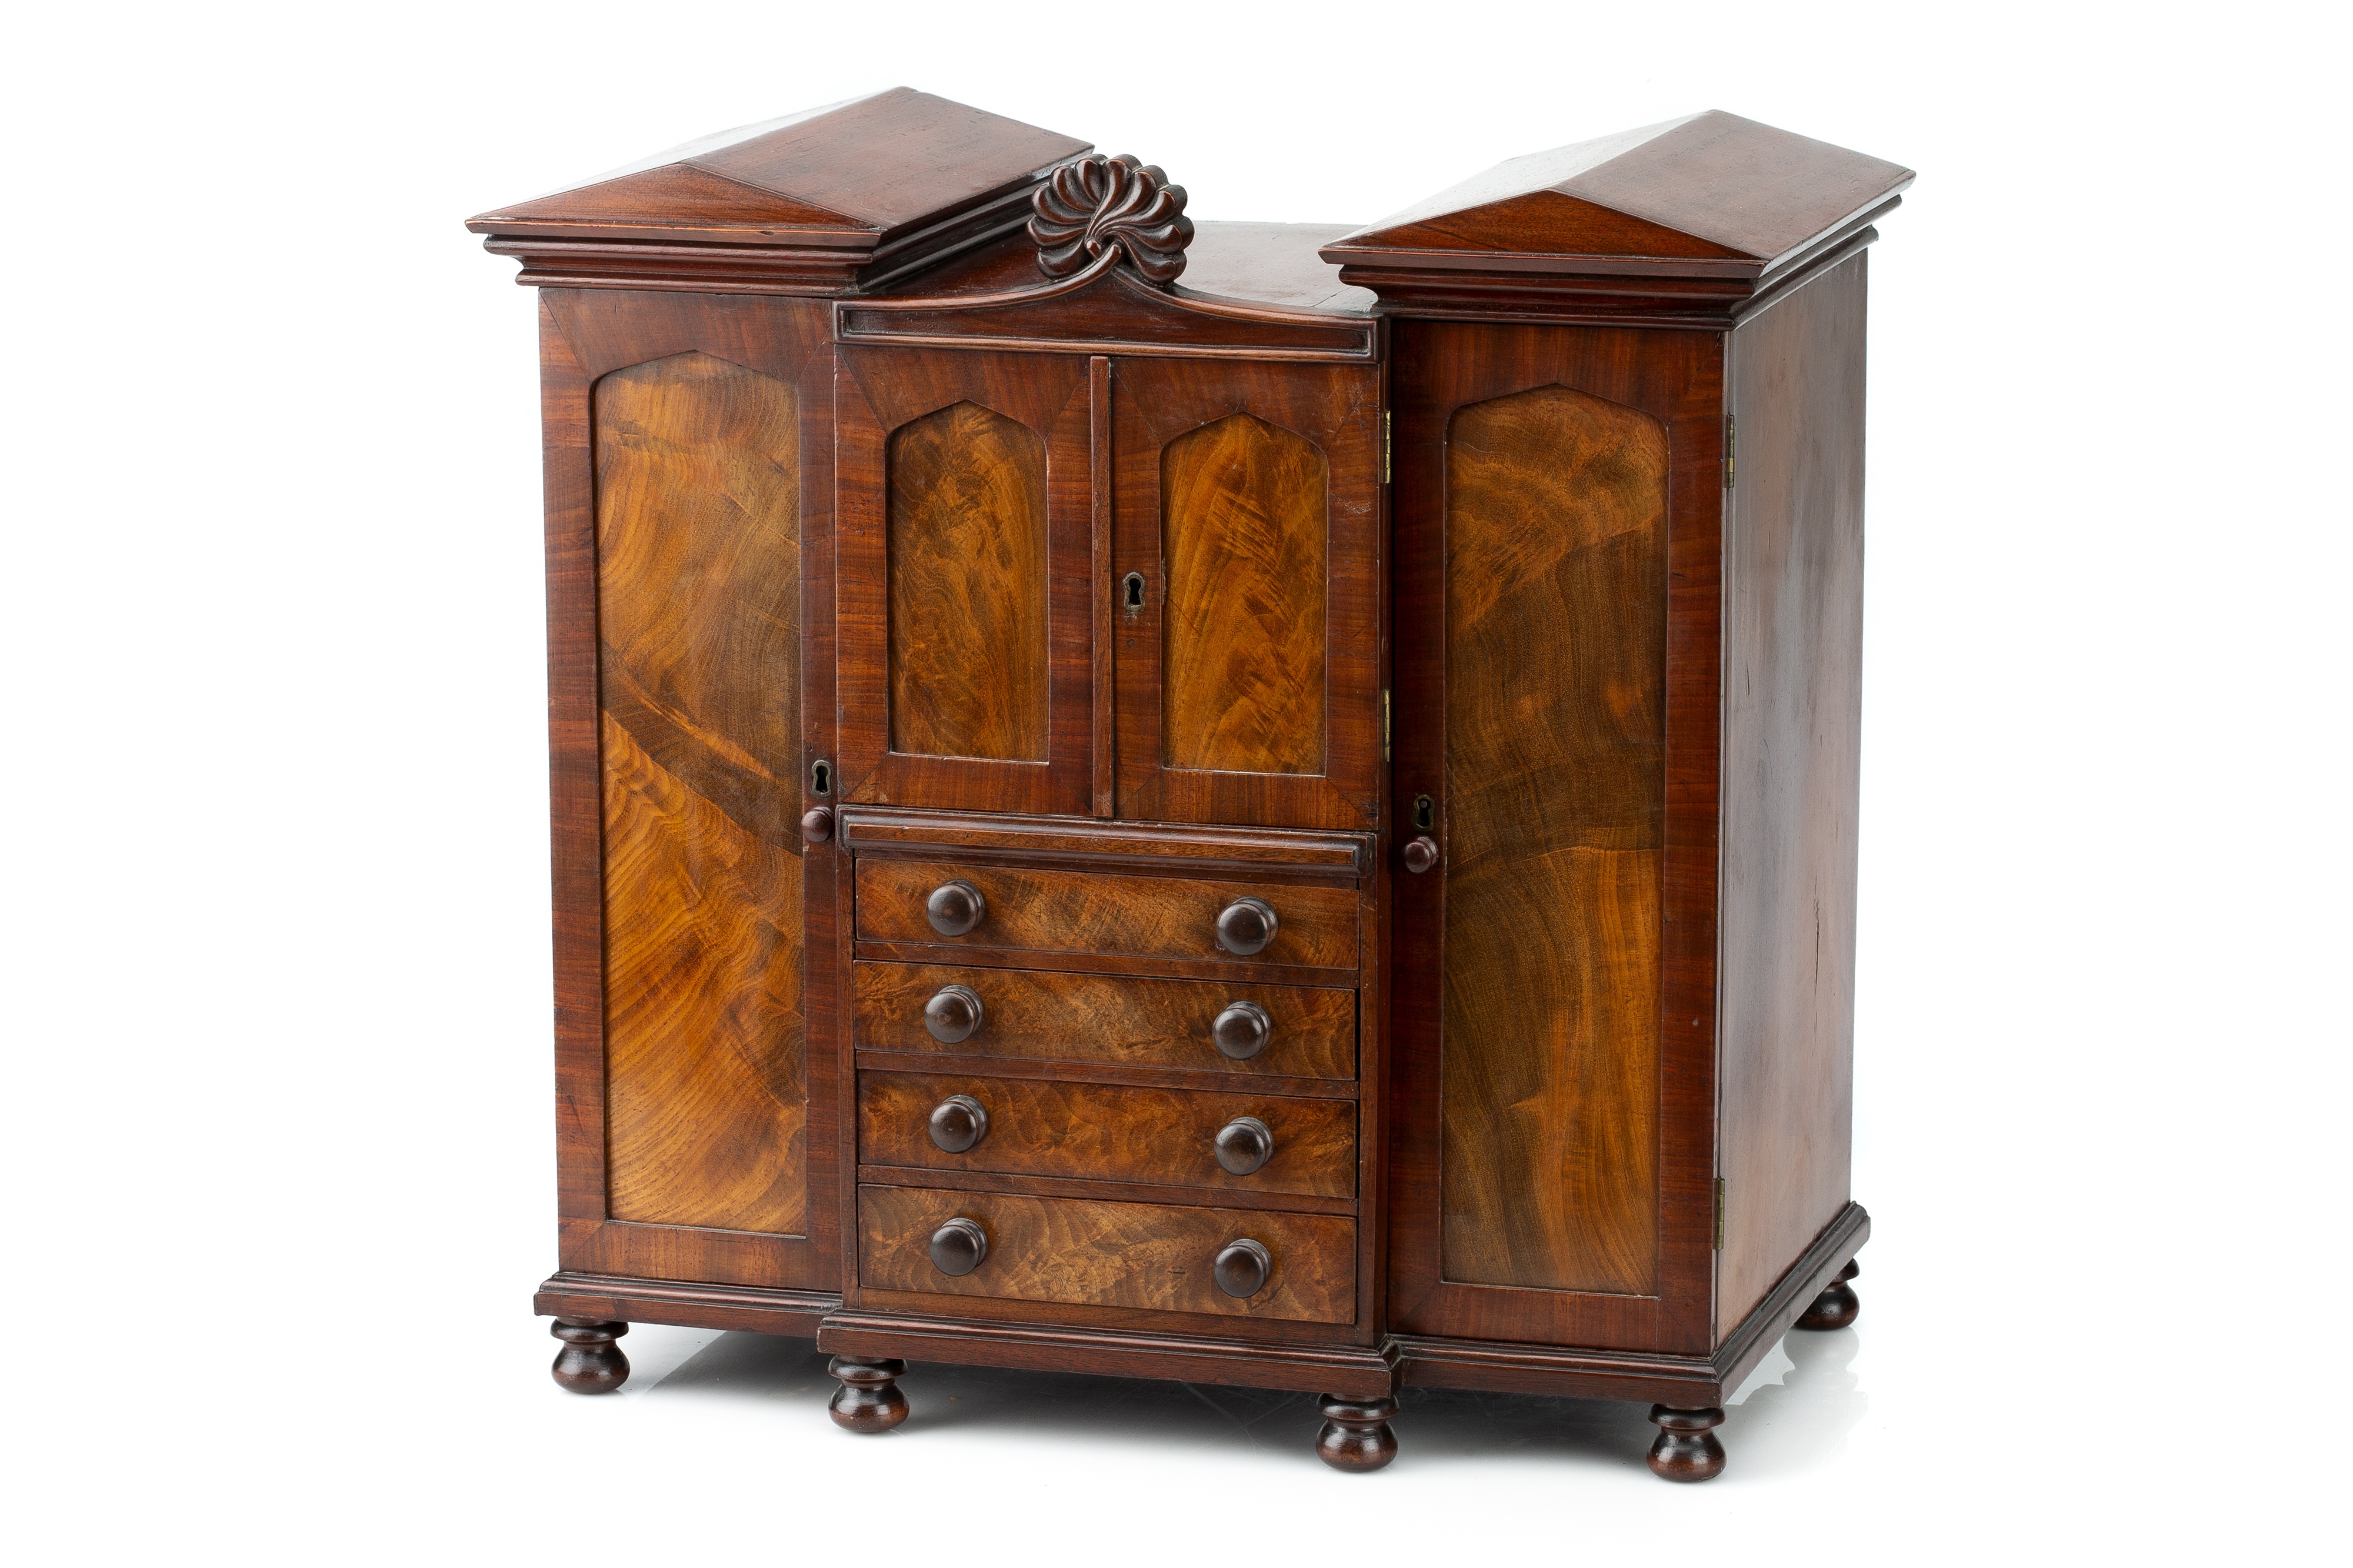 A Fine Breakfront Collectors Cabinet - Image 2 of 4